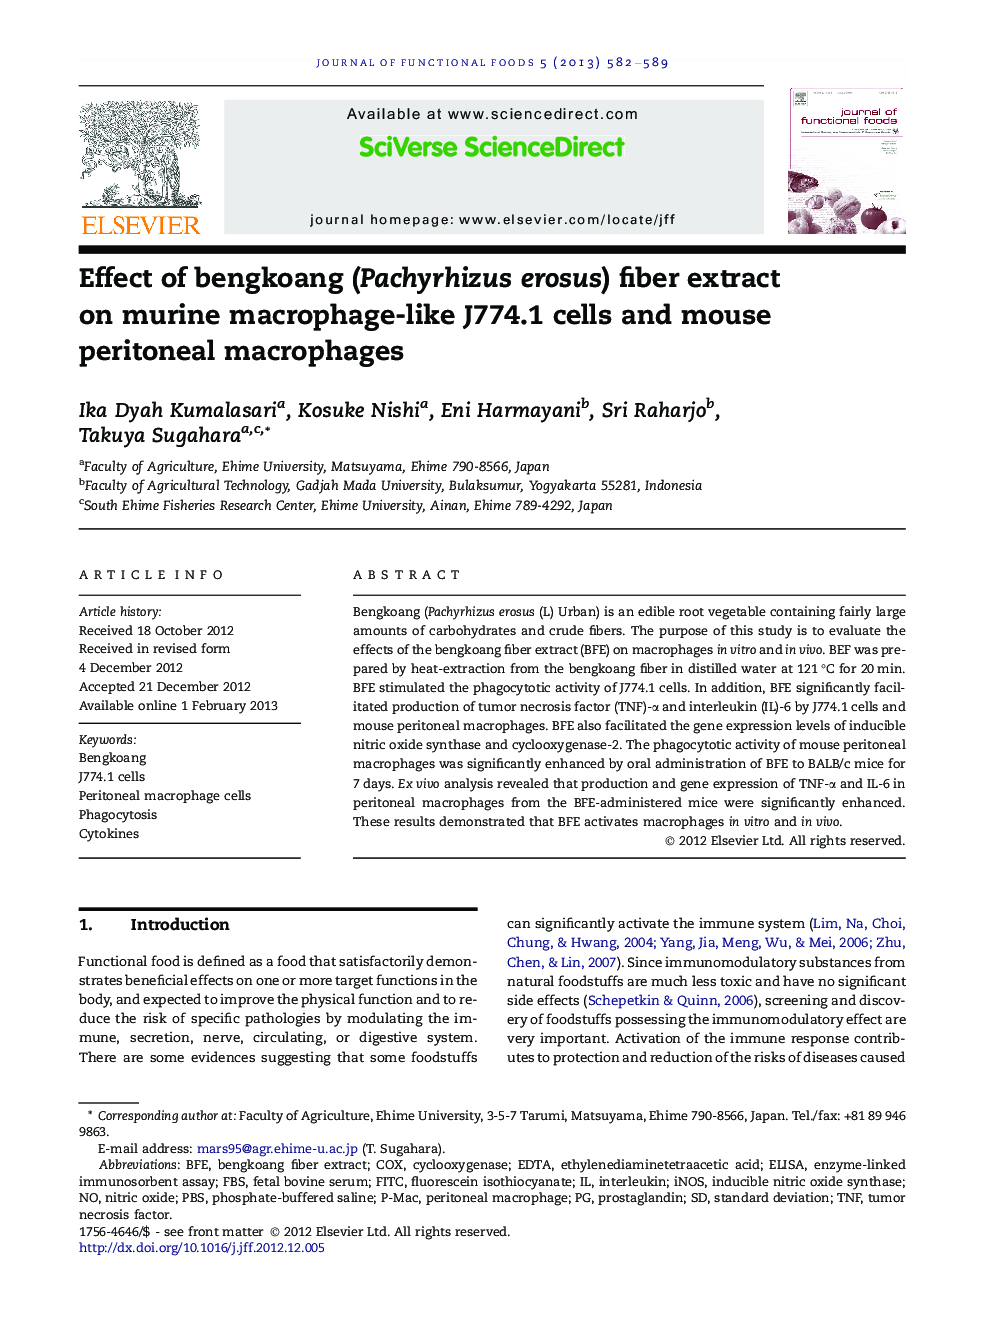 Effect of bengkoang (Pachyrhizus erosus) fiber extract on murine macrophage-like J774.1 cells and mouse peritoneal macrophages